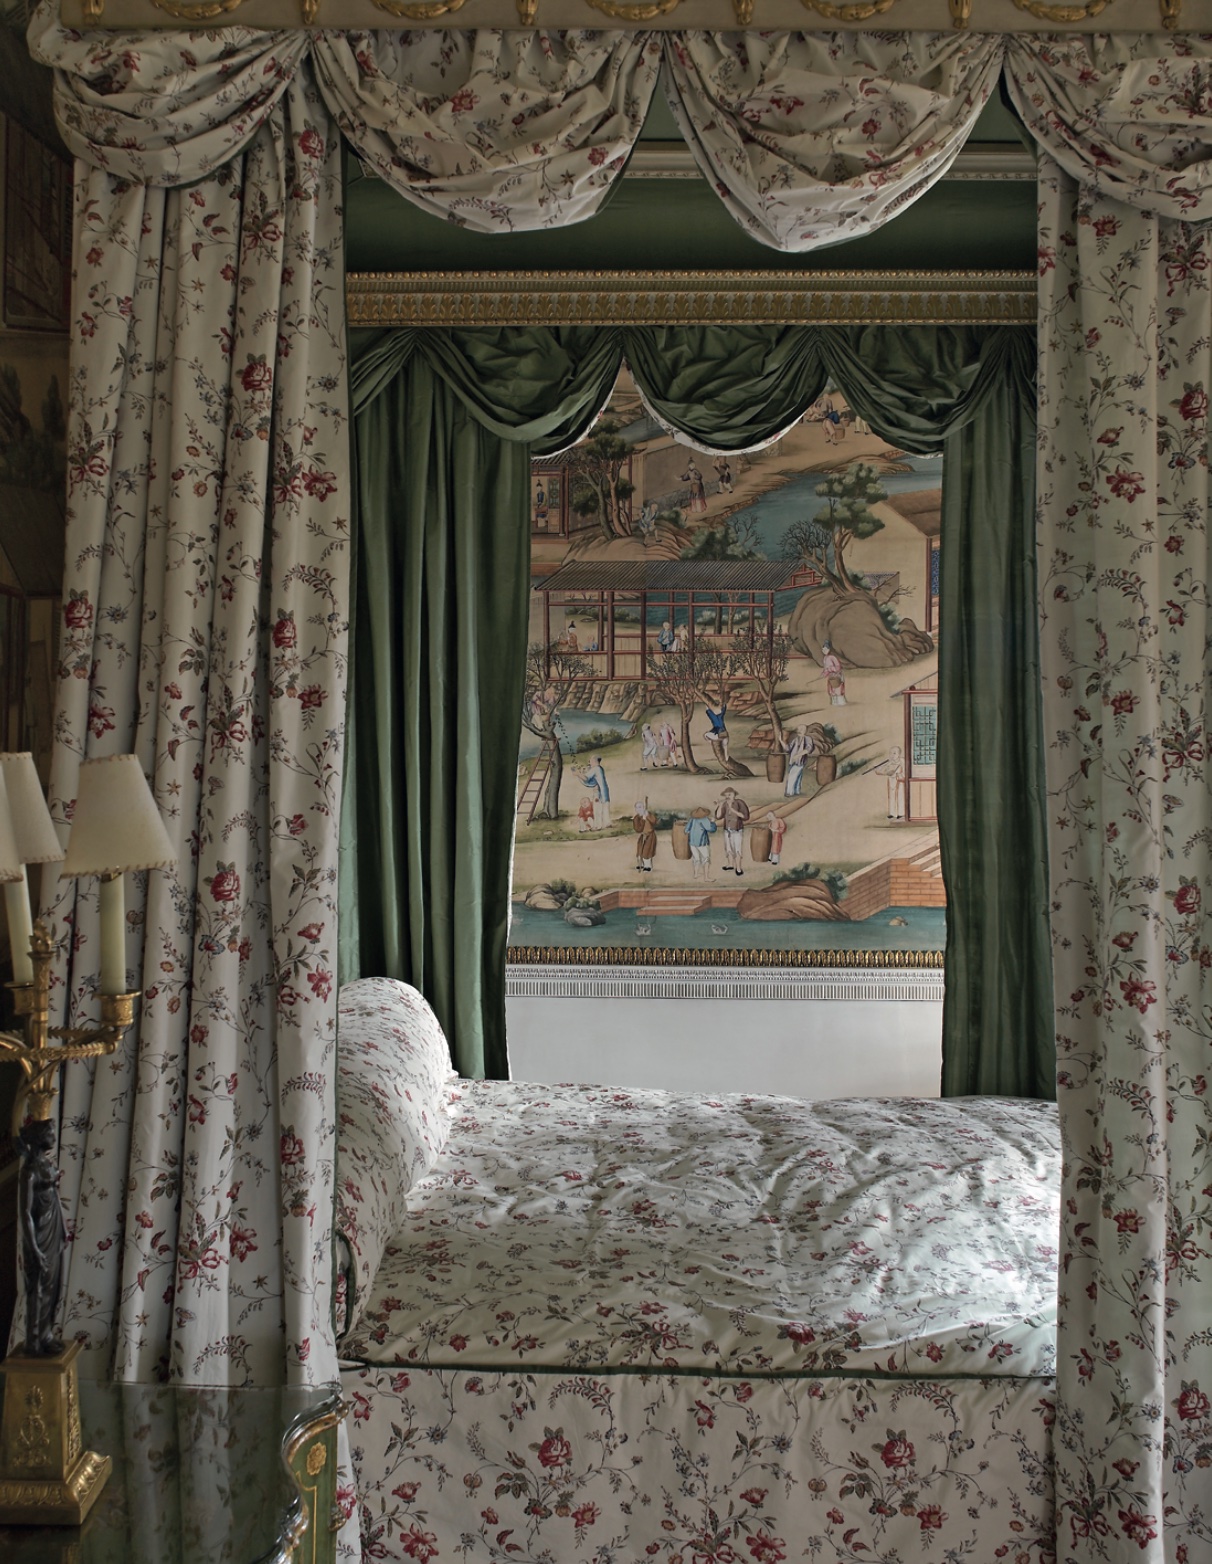 Chinese Wallpaper is situated in the East Bedroom at Harewood House